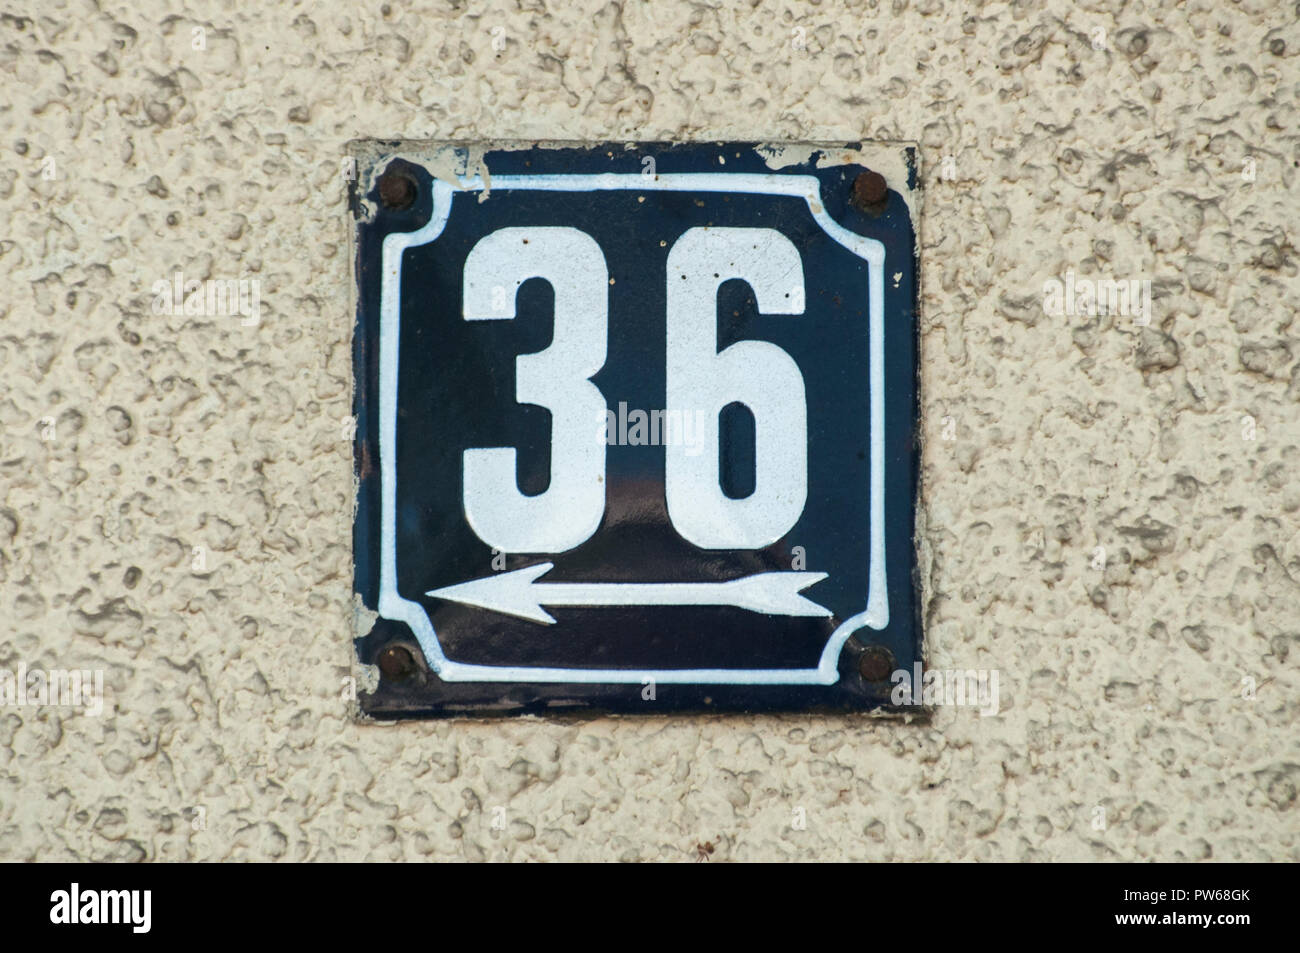 Weathered grunge square metal enameled plate of number of street address with number 36 closeup Stock Photo